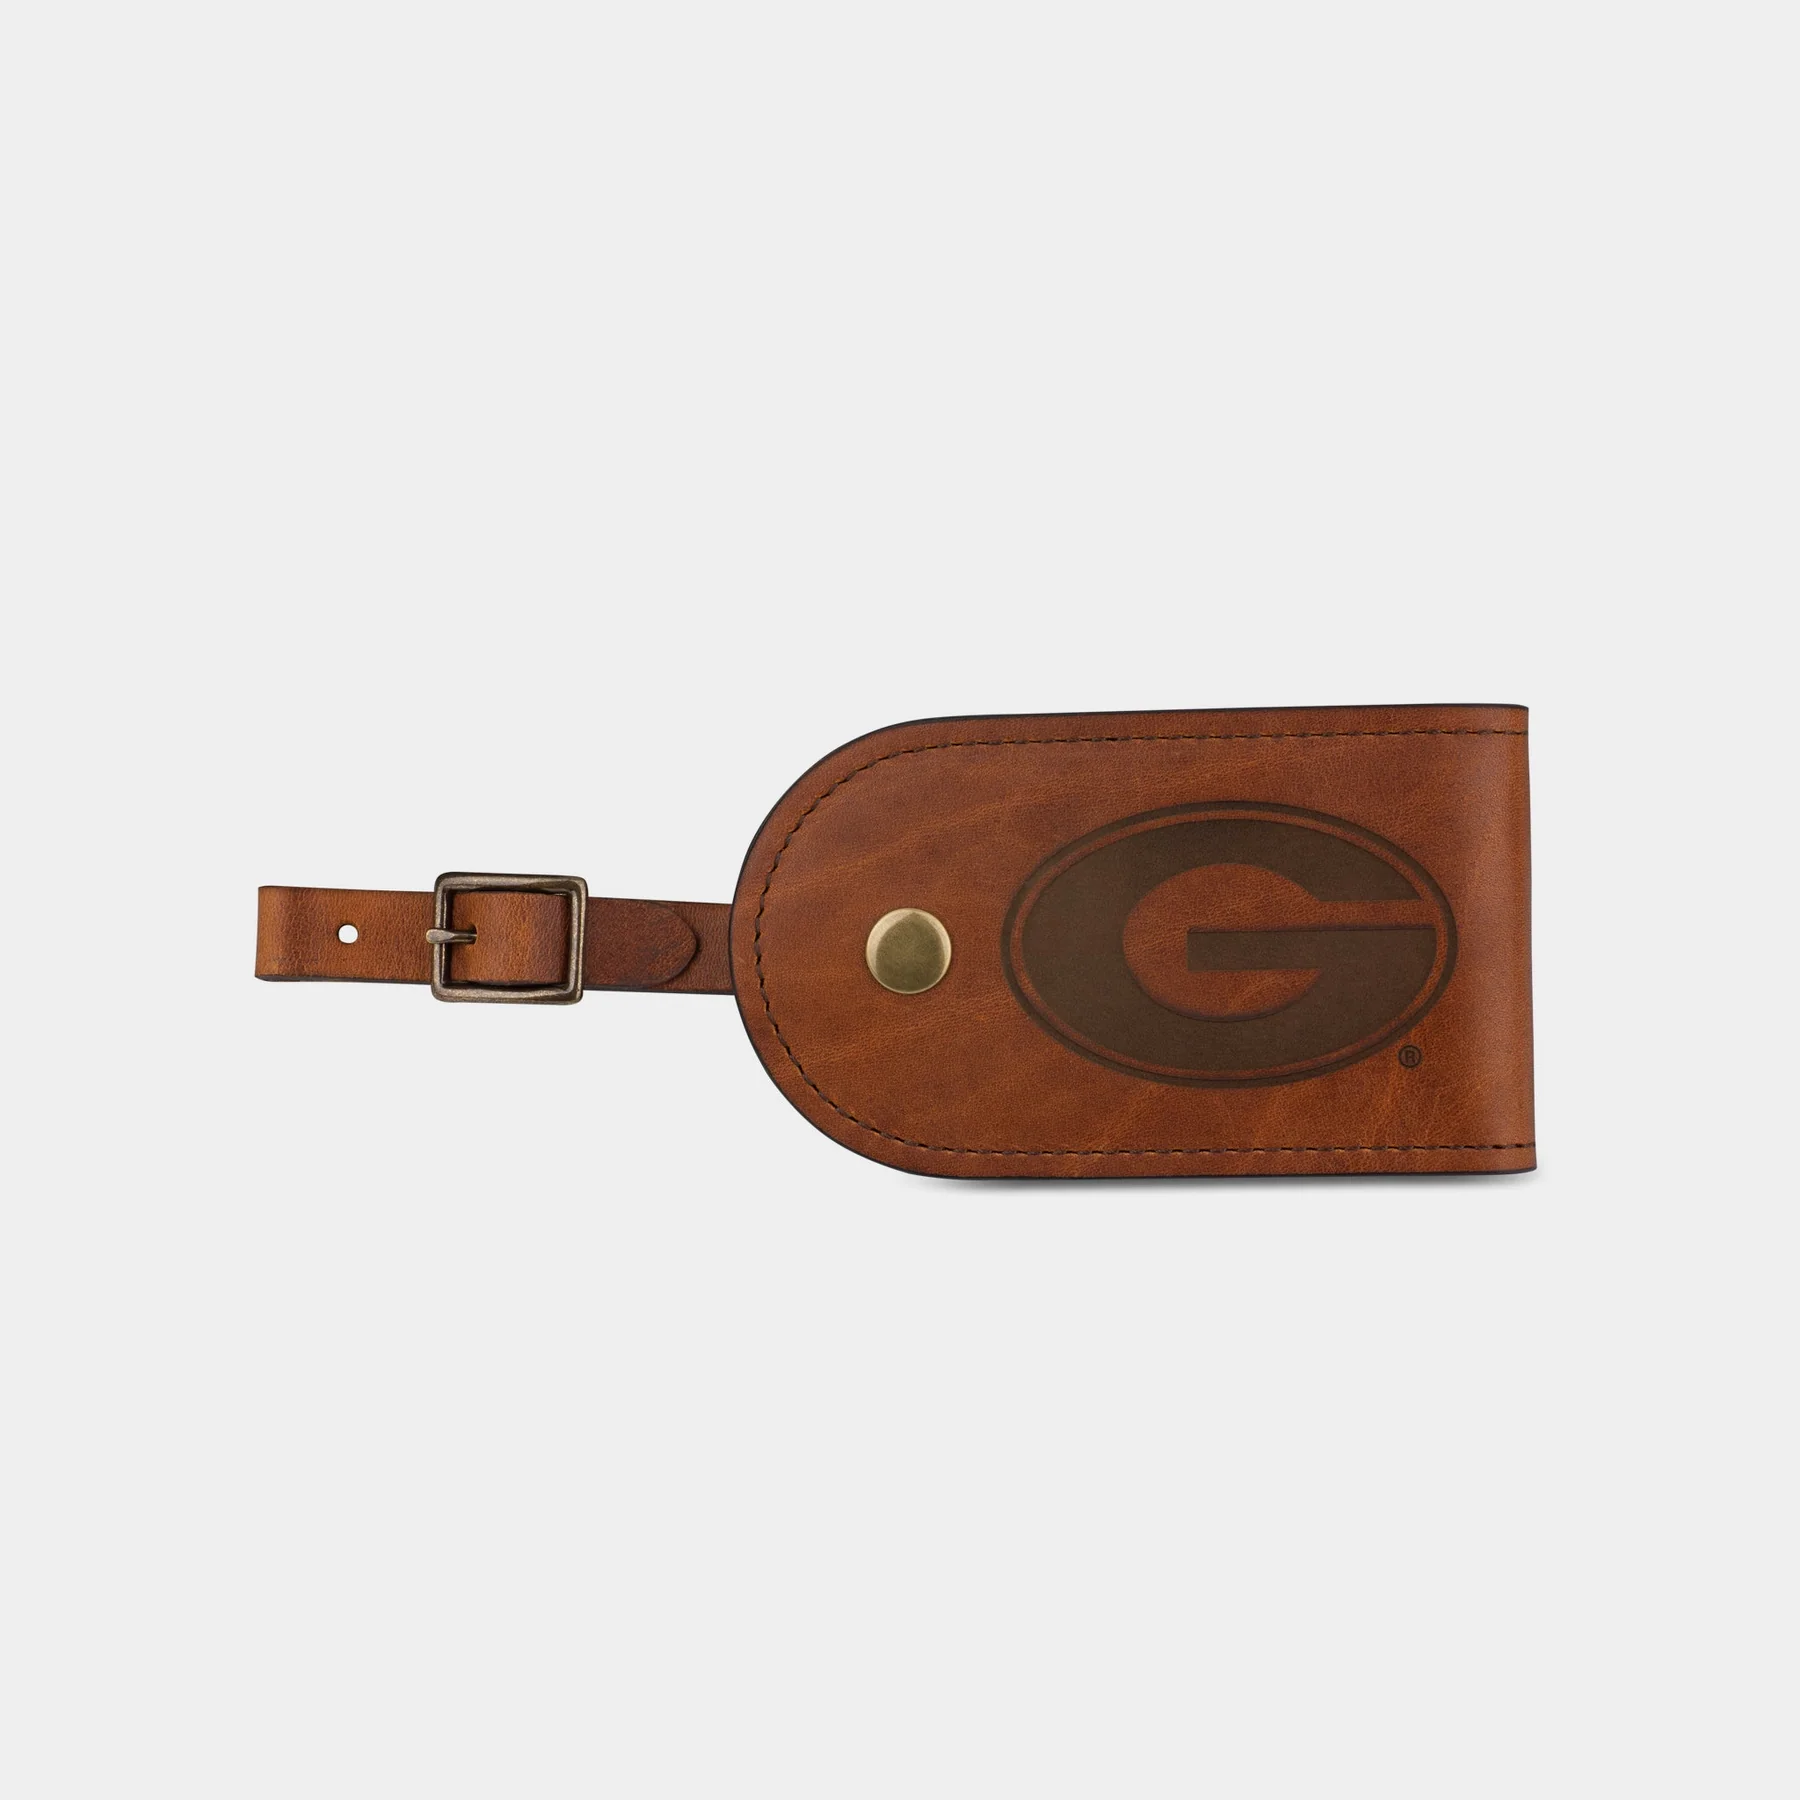 UGA "G" Leather Luggage Tag in Brown